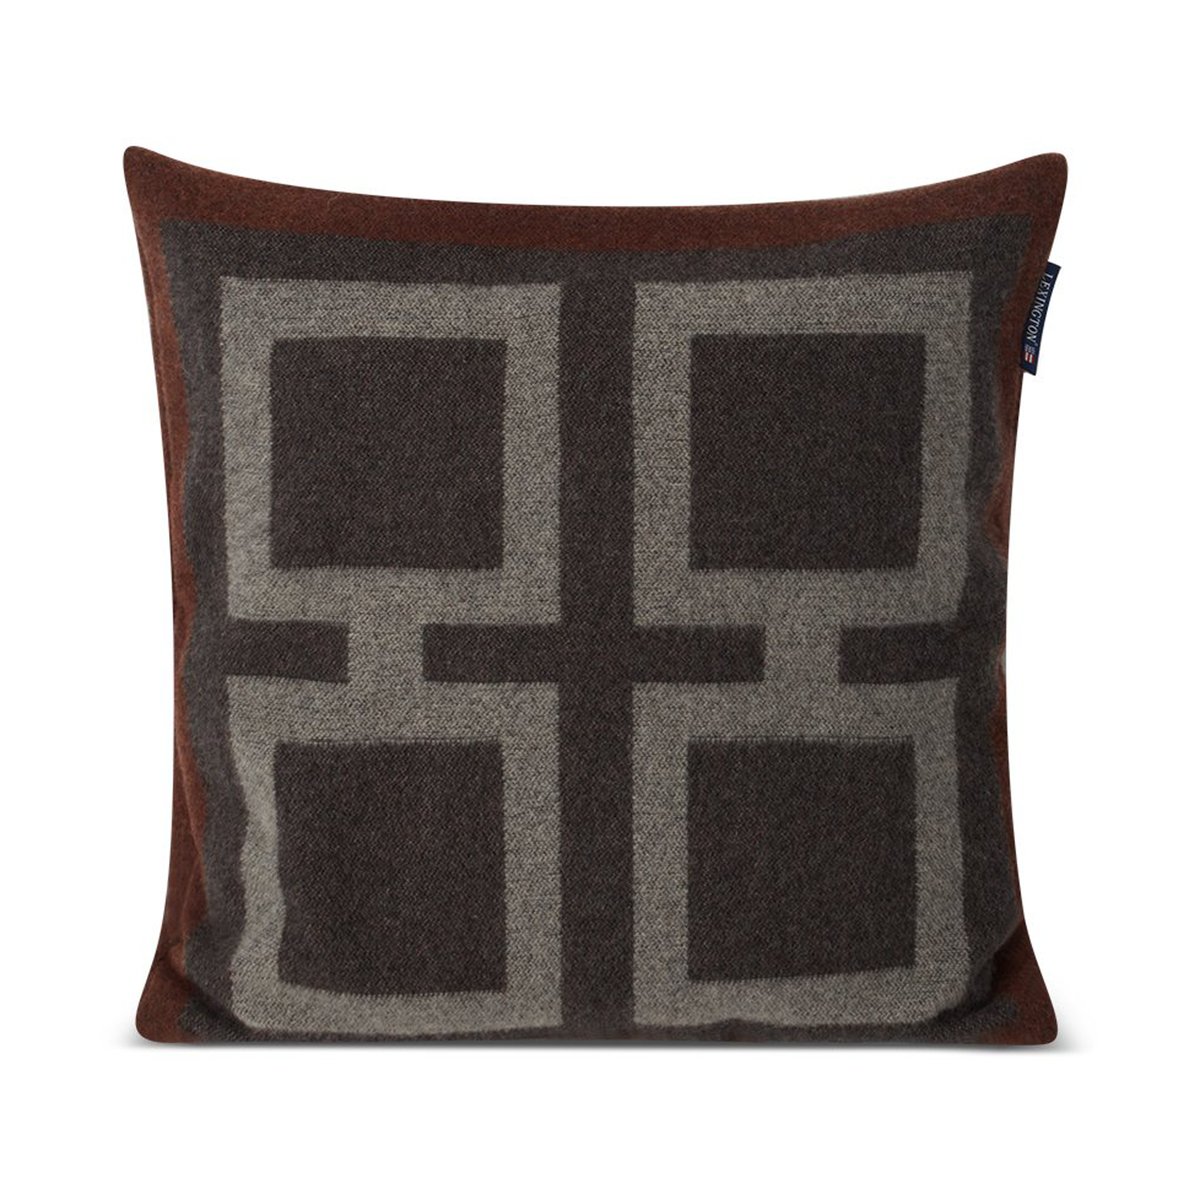 Lexington Graphic Recycled Wool kussenhoes 50x50 cm Dark gray-white-brown